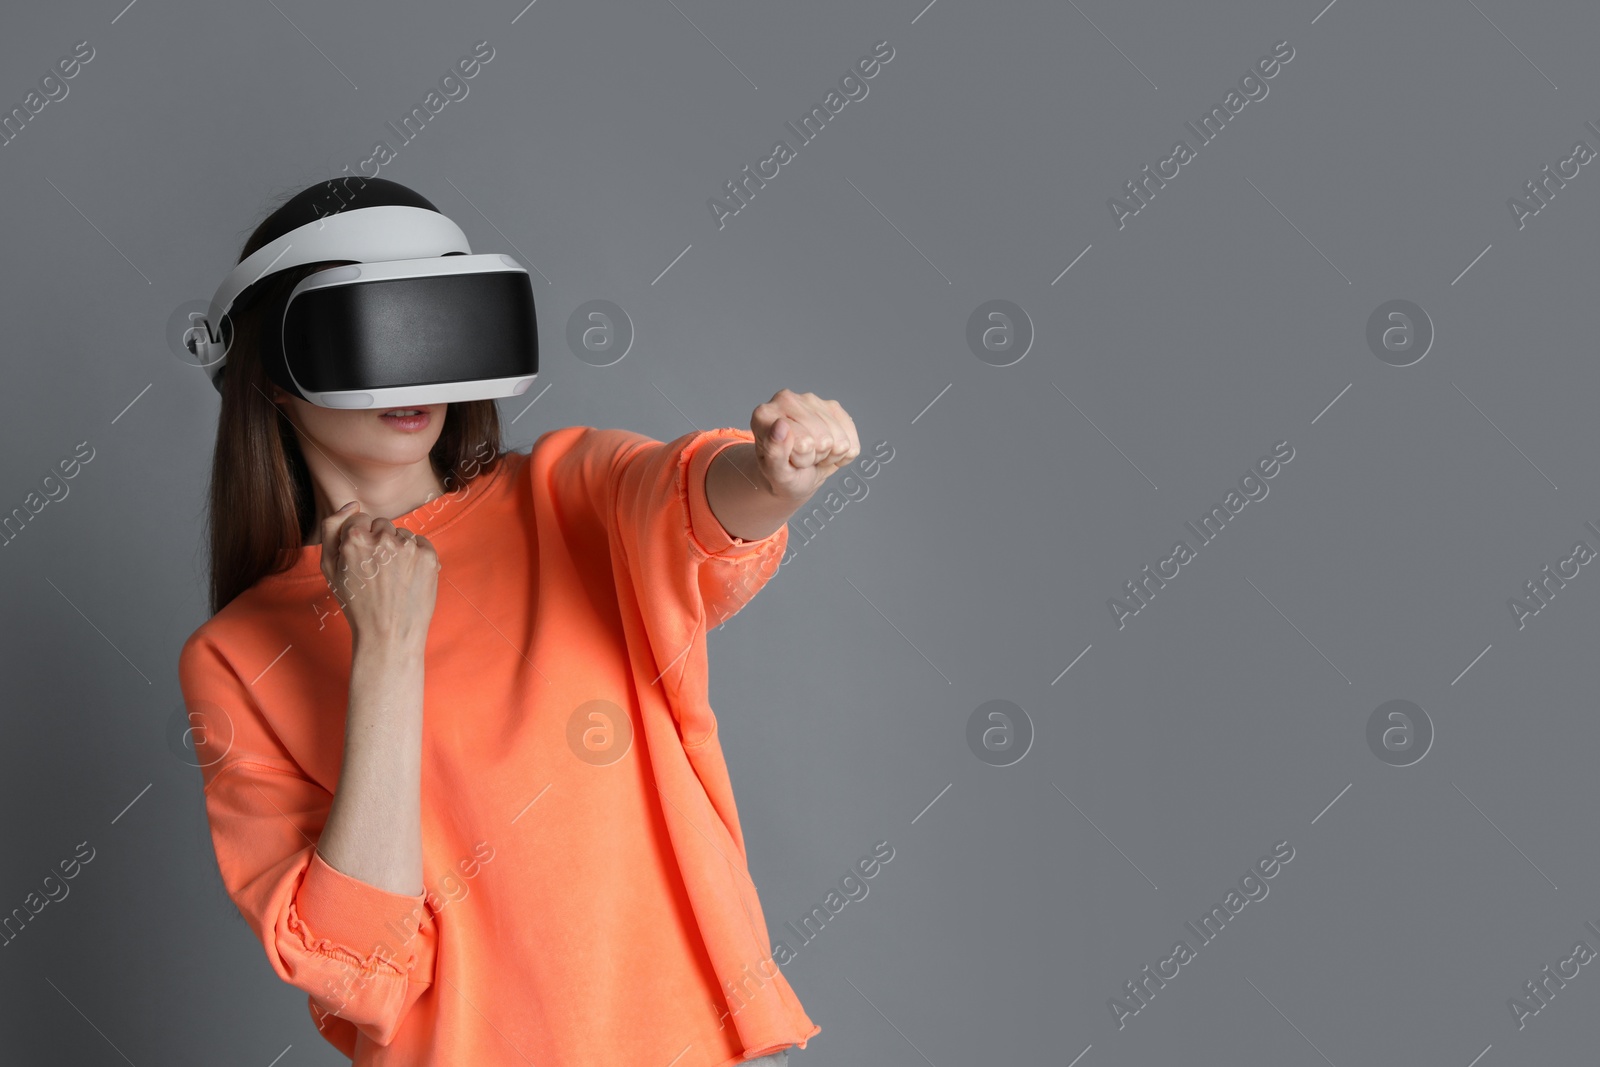 Photo of Woman using virtual reality headset on gray background, space for text